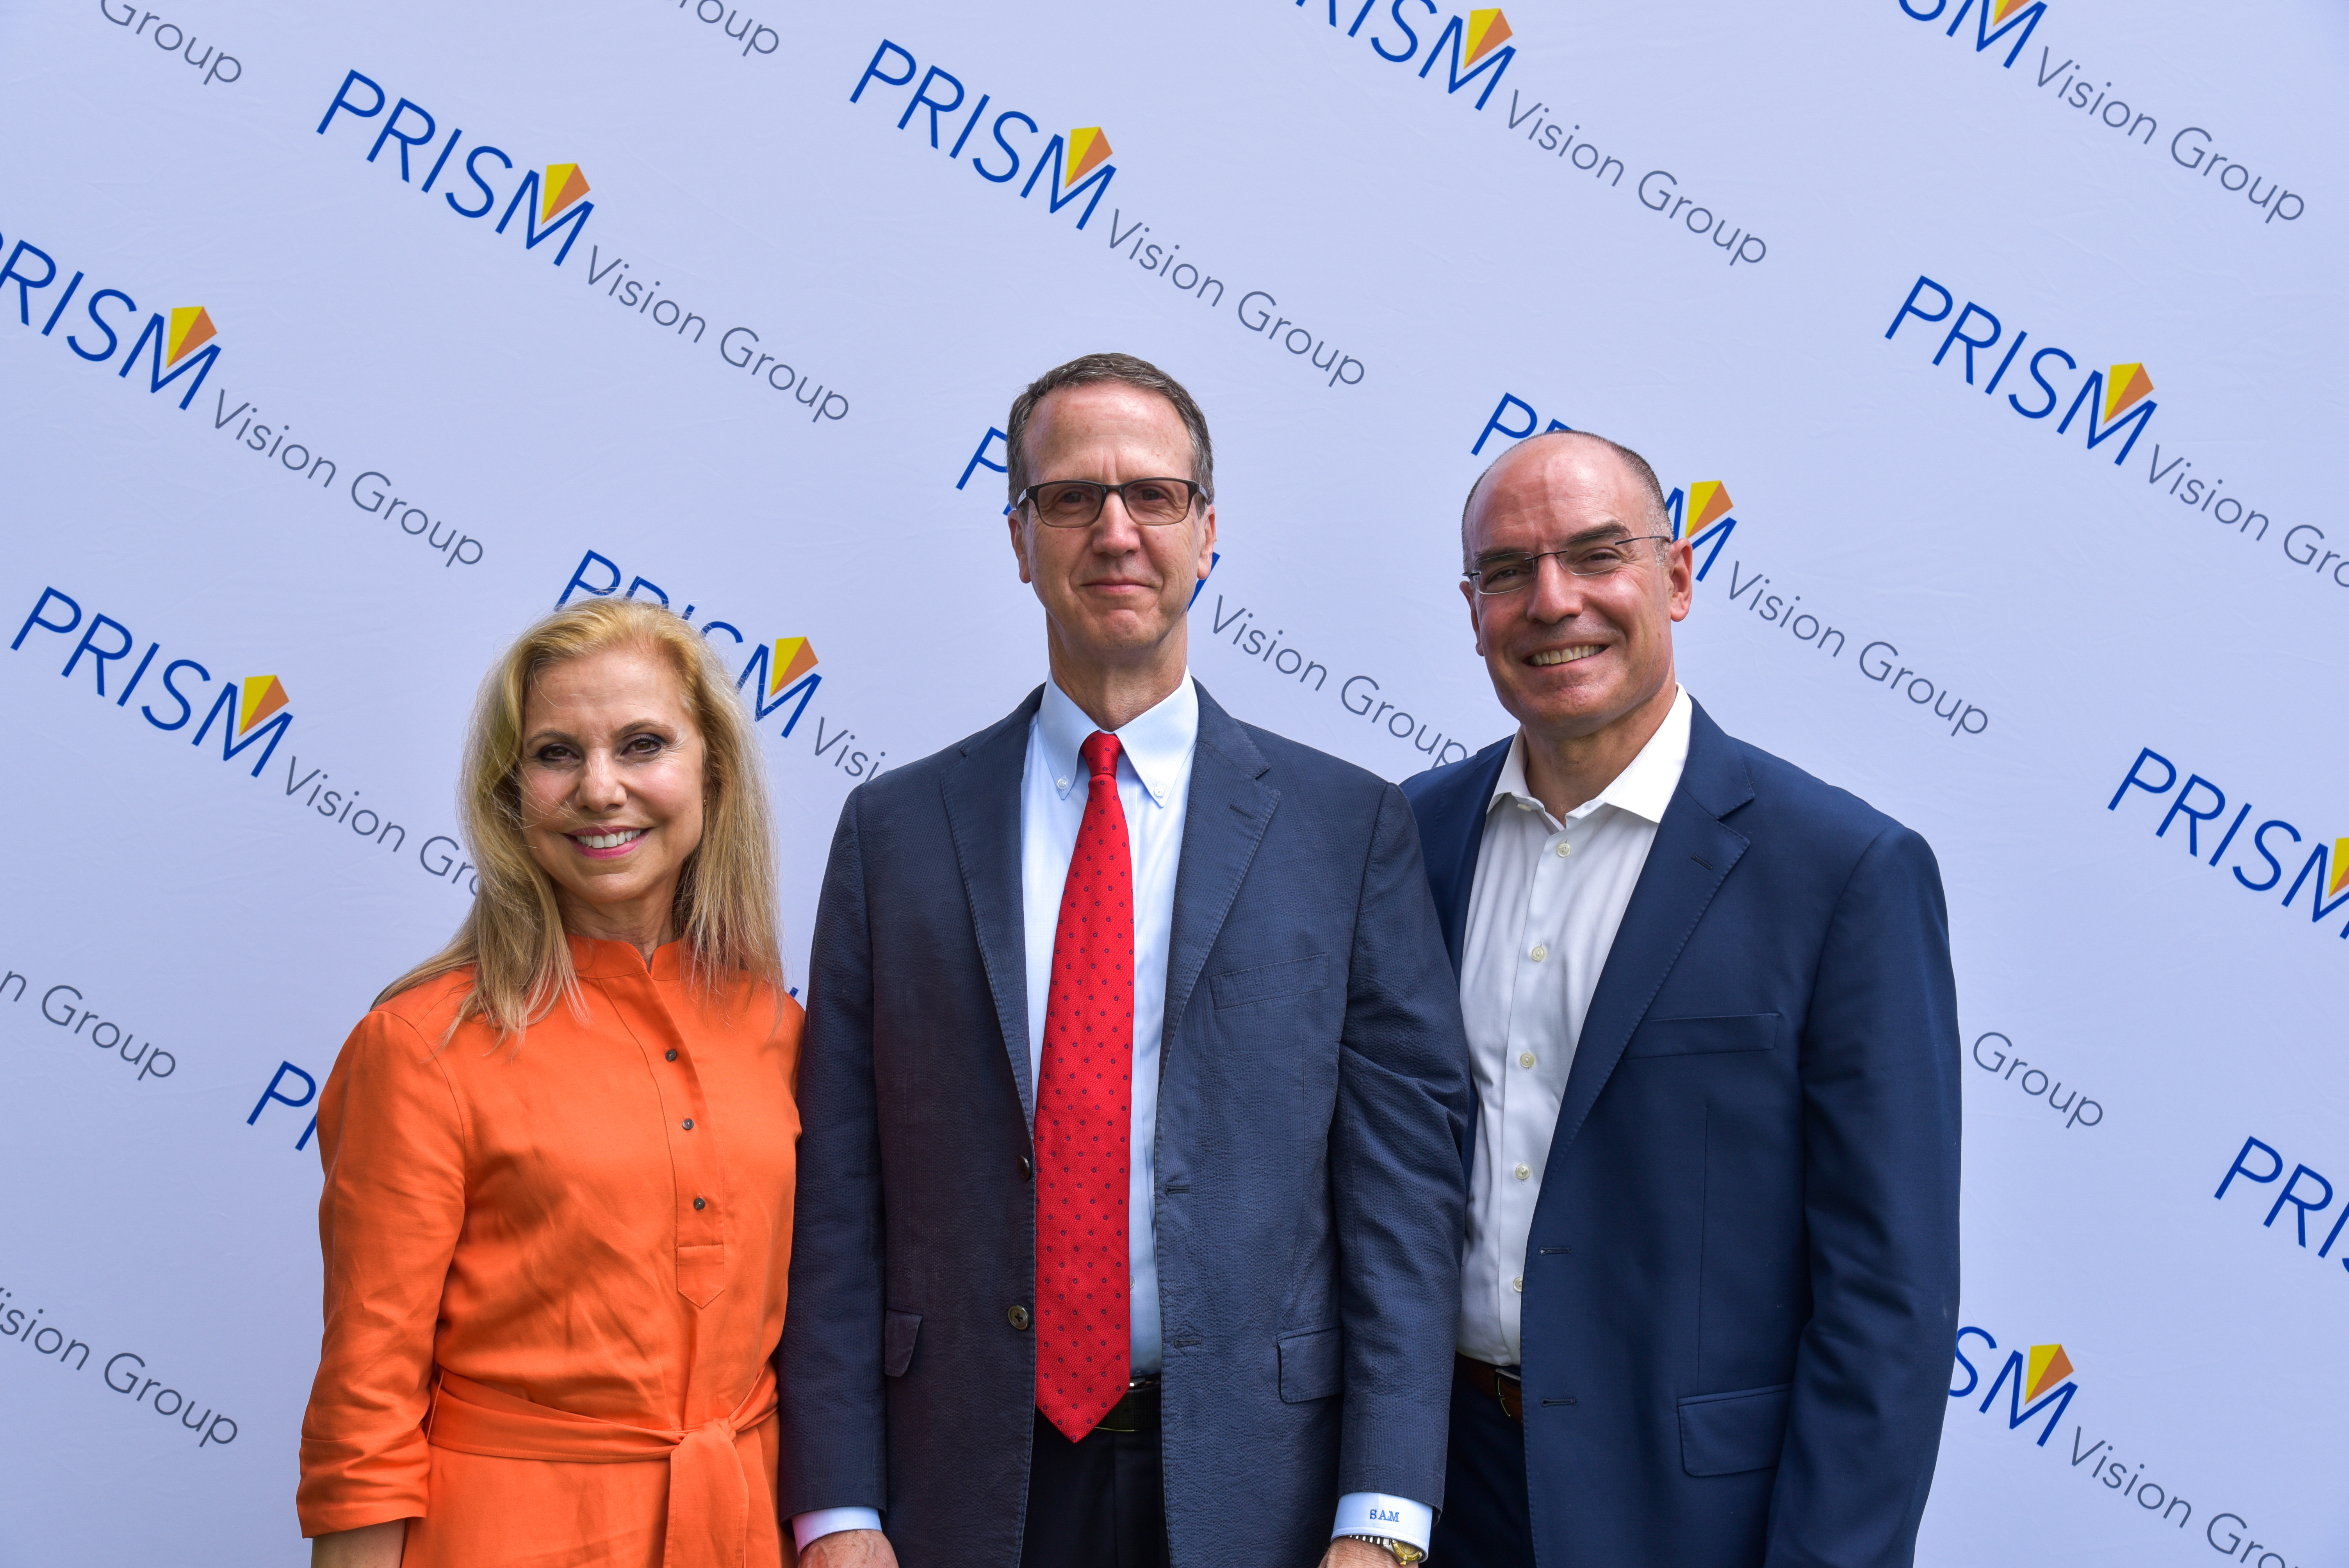 PRISM Vision Group Announces Launch of New Brand